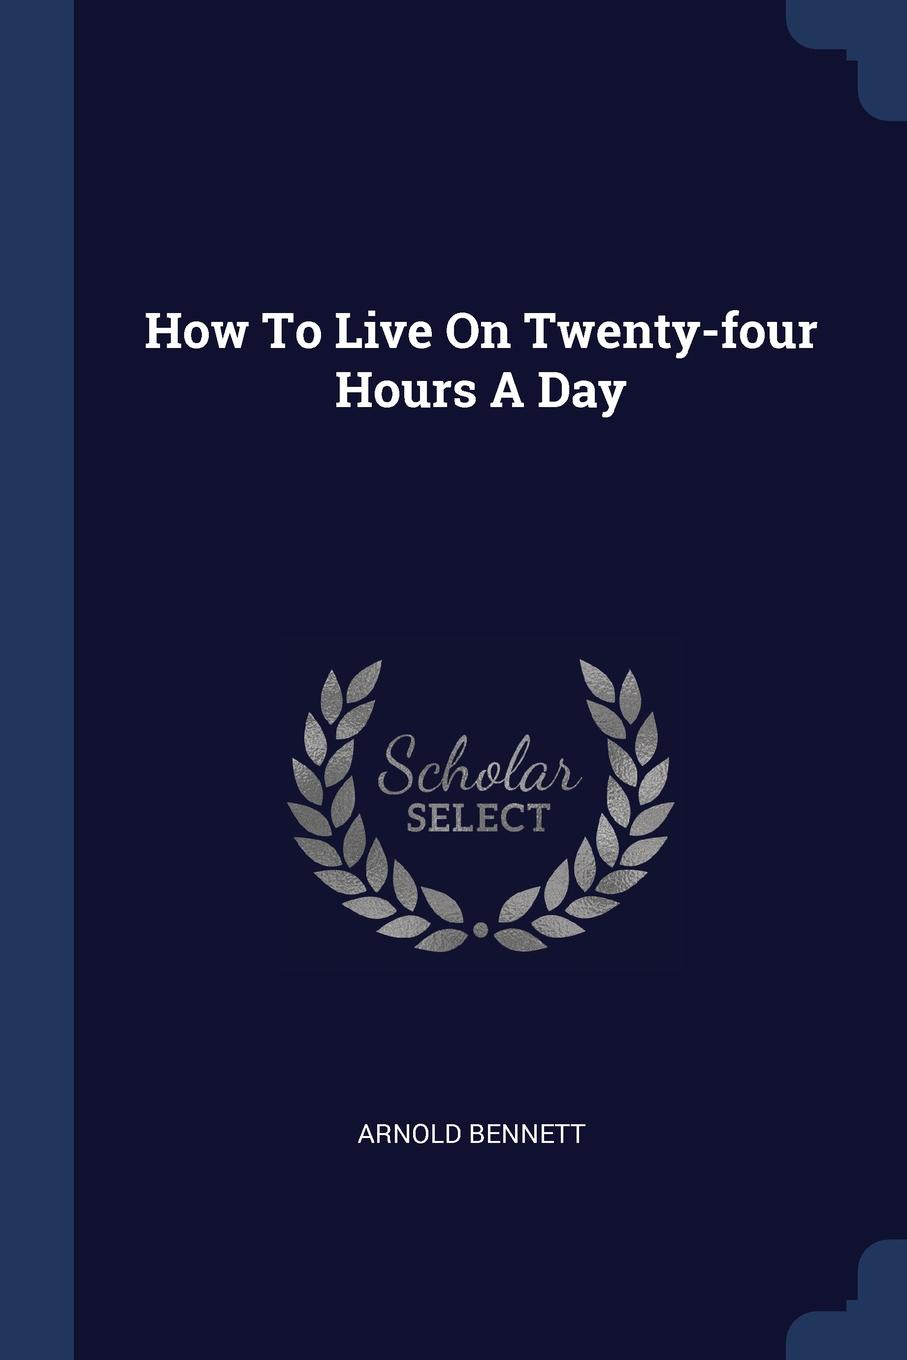 How To Live On Twenty-four Hours A Day